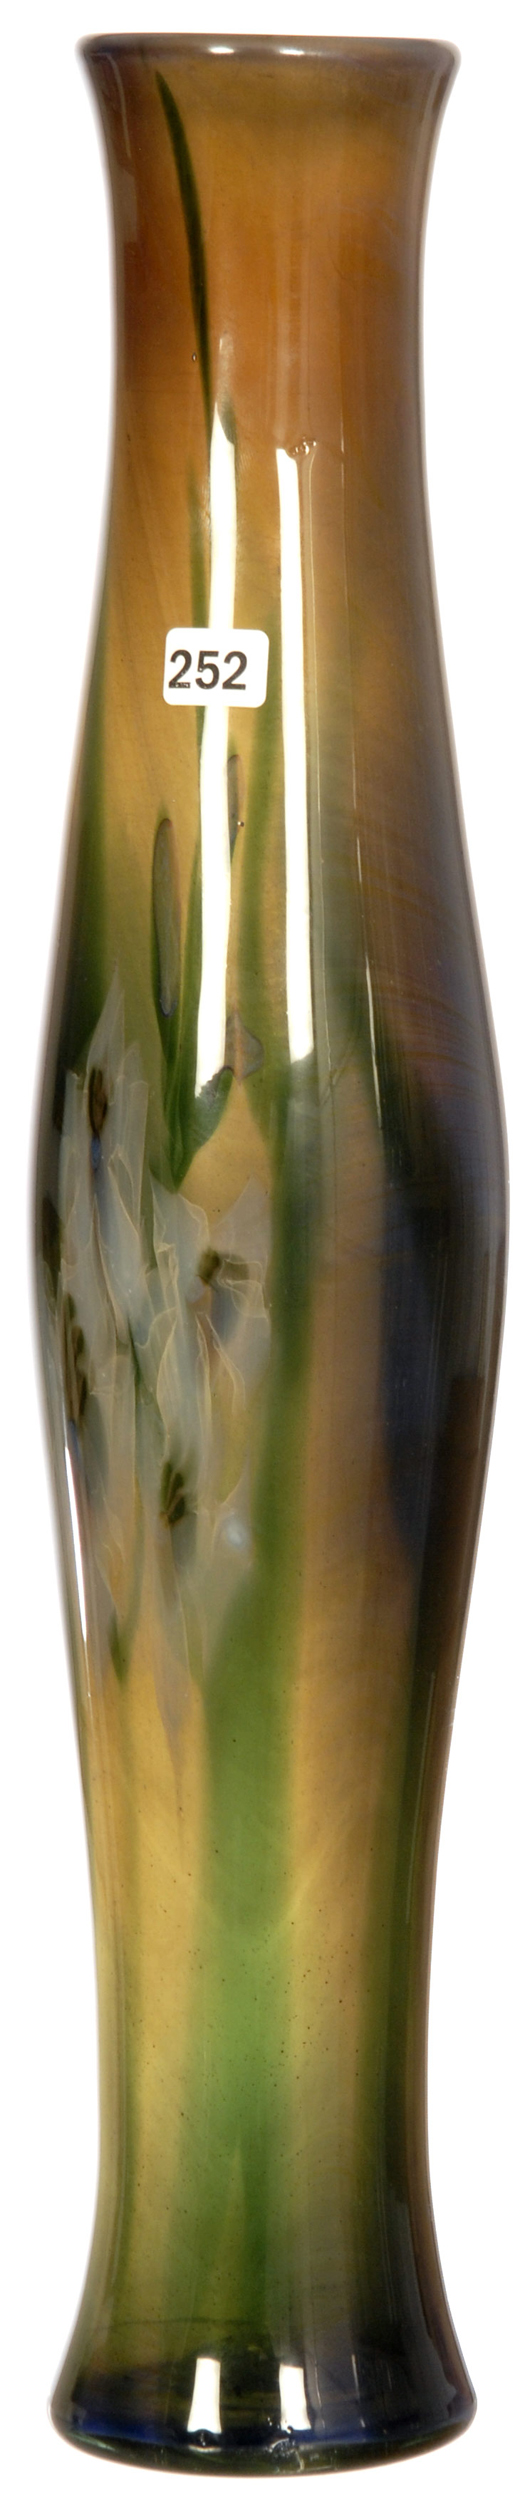 20-inch signed Tiffany art glass gladiola paperweight vase with white blossom décor. Price realized: $44,000. Woody Auction image.